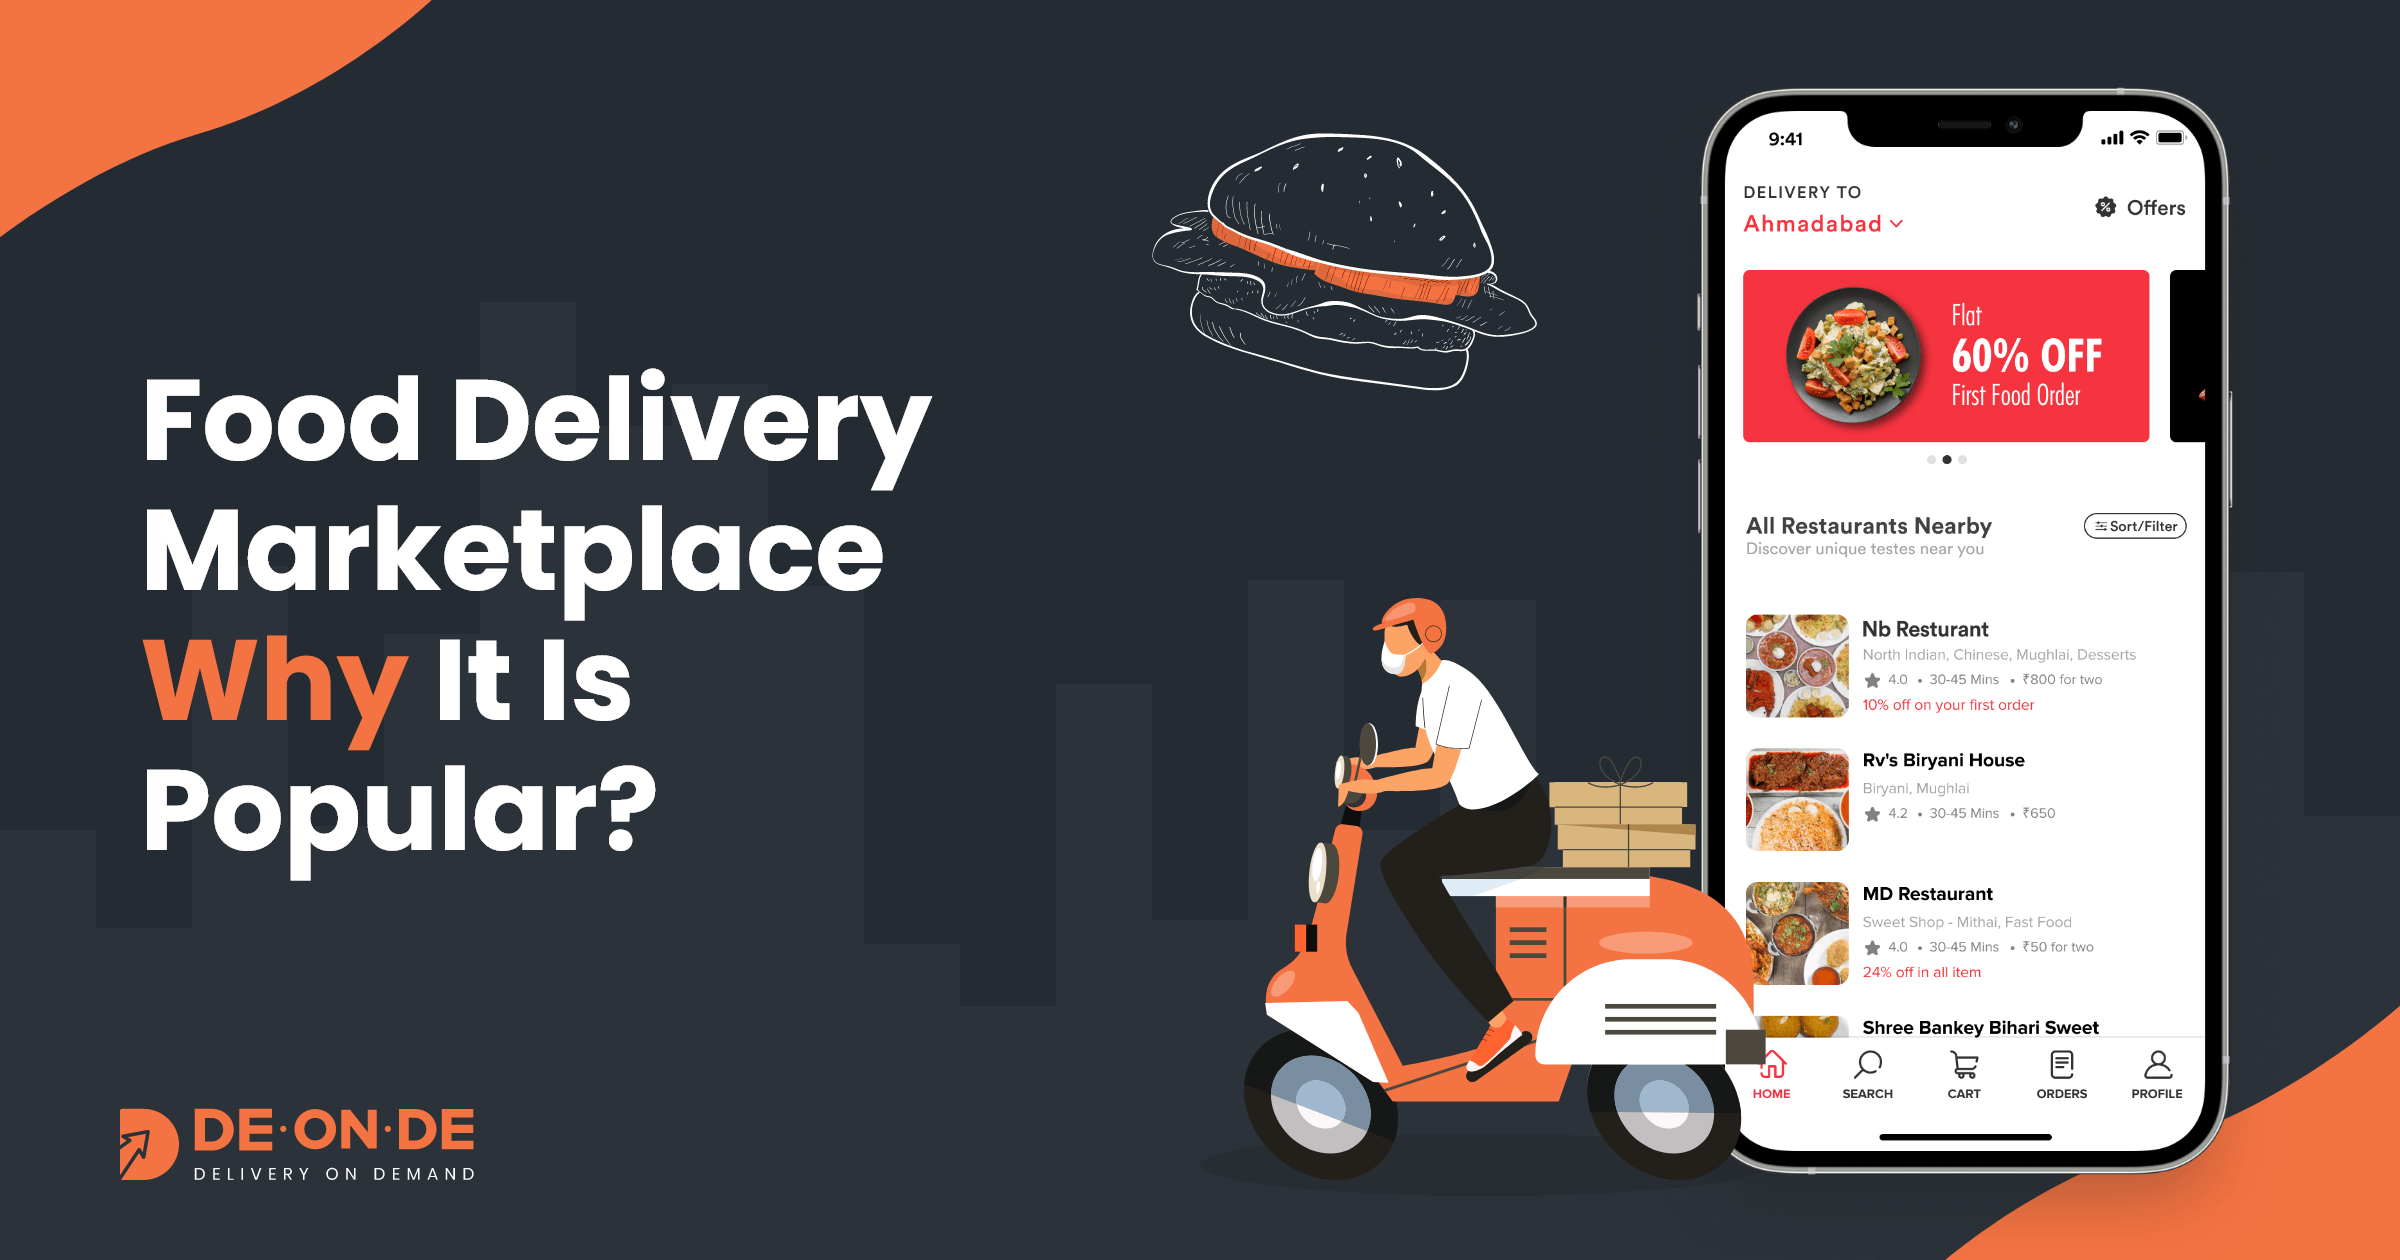 On-Demand Food Delivery Marketplace